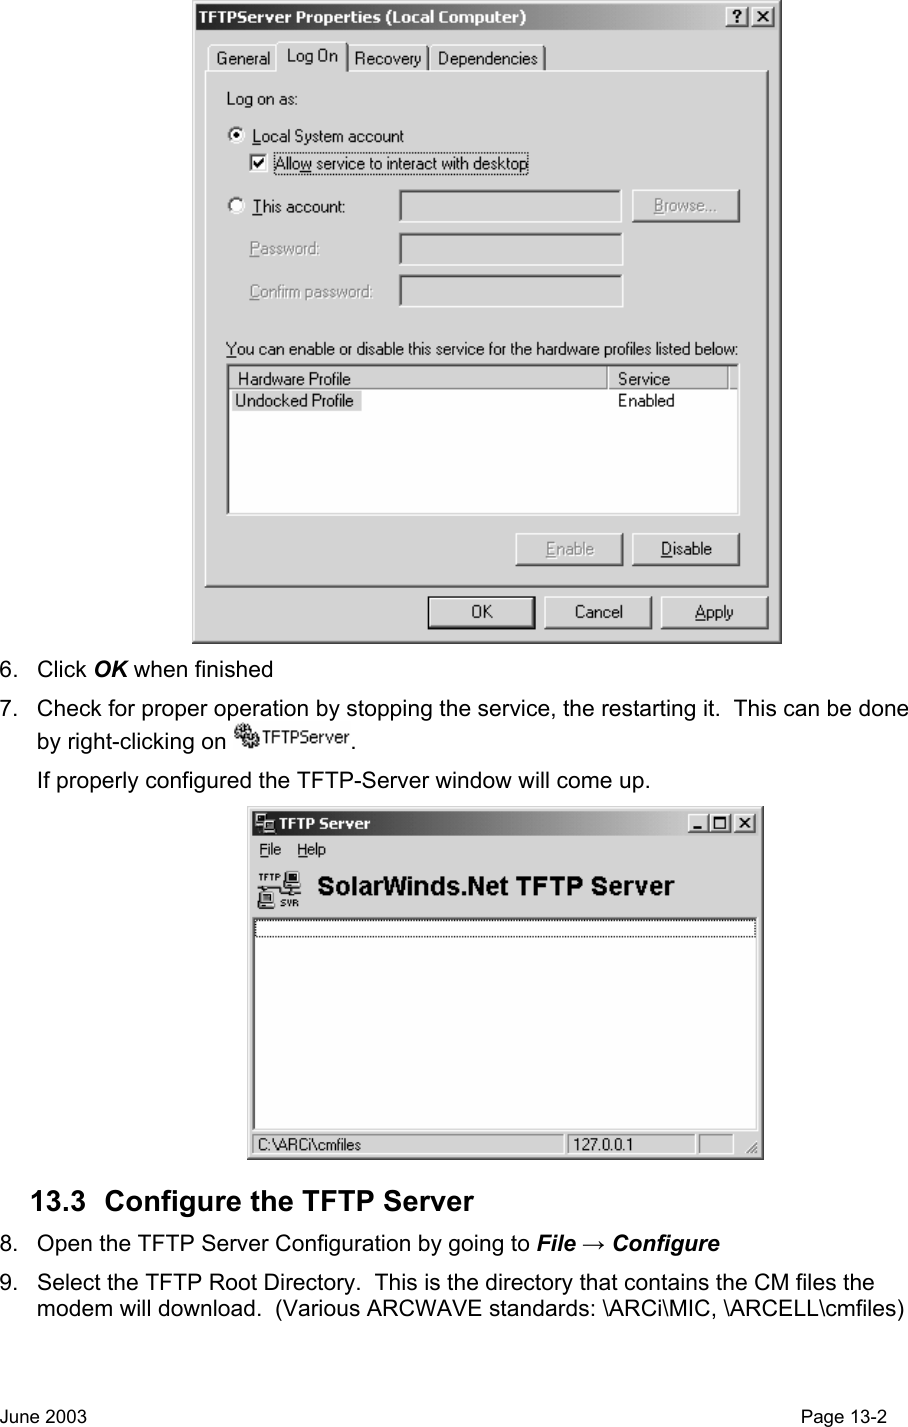   6. Click OK when finished 7.  Check for proper operation by stopping the service, the restarting it.  This can be done by right-clicking on  . If properly configured the TFTP-Server window will come up.  13.3  Configure the TFTP Server 8.  Open the TFTP Server Configuration by going to File → Configure  9.  Select the TFTP Root Directory.  This is the directory that contains the CM files the modem will download.  (Various ARCWAVE standards: \ARCi\MIC, \ARCELL\cmfiles) June 2003                                                                                                                                         Page 13-2  